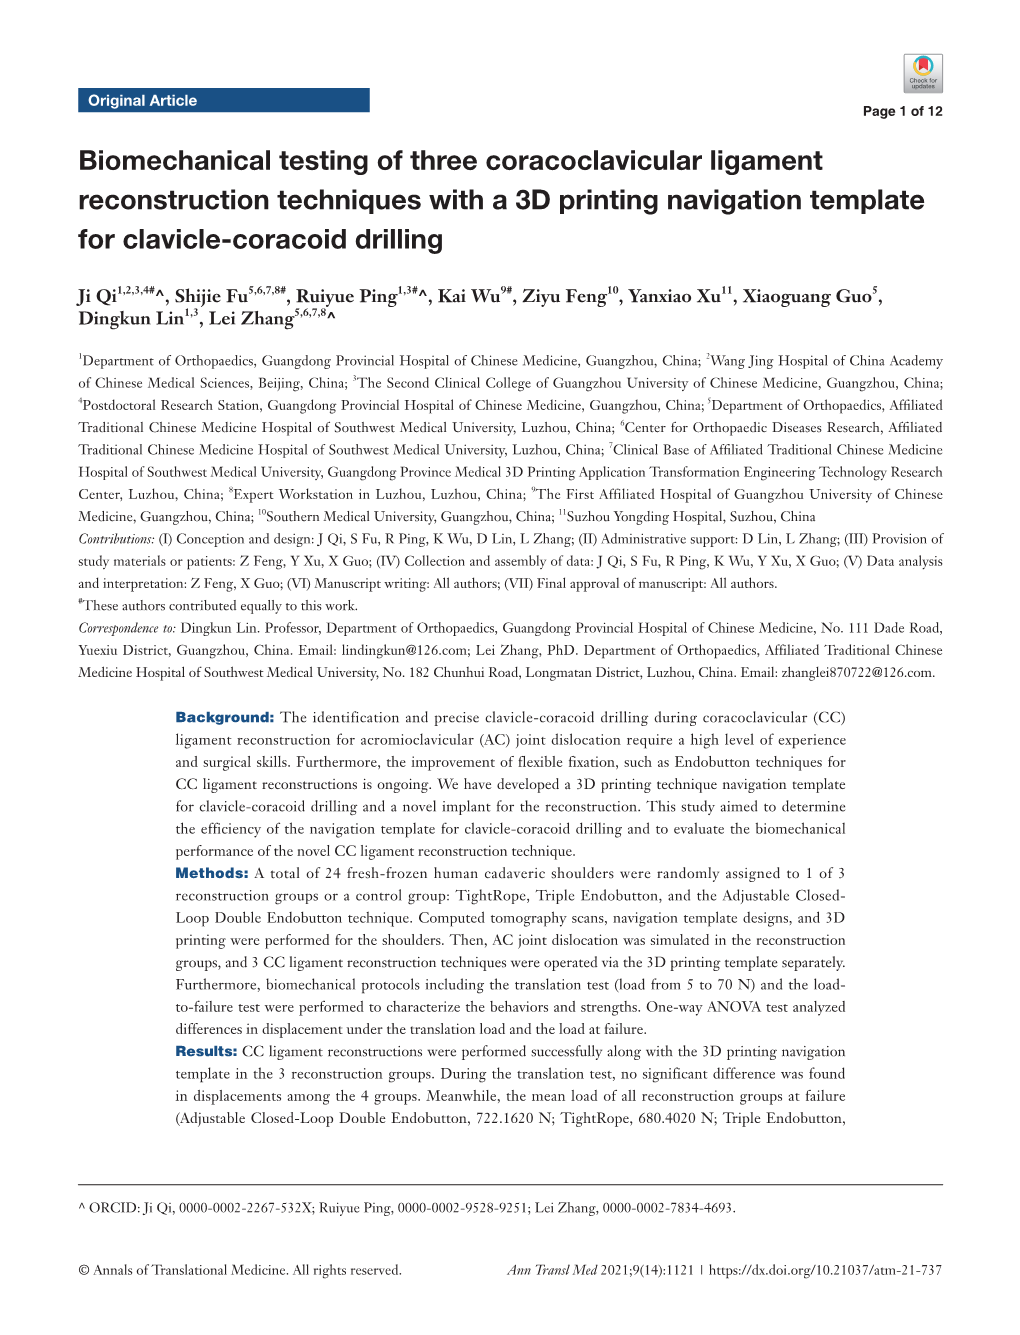 Biomechanical Testing of Three Coracoclavicular Ligament Reconstruction Techniques with a 3D Printing Navigation Template for Clavicle-Coracoid Drilling